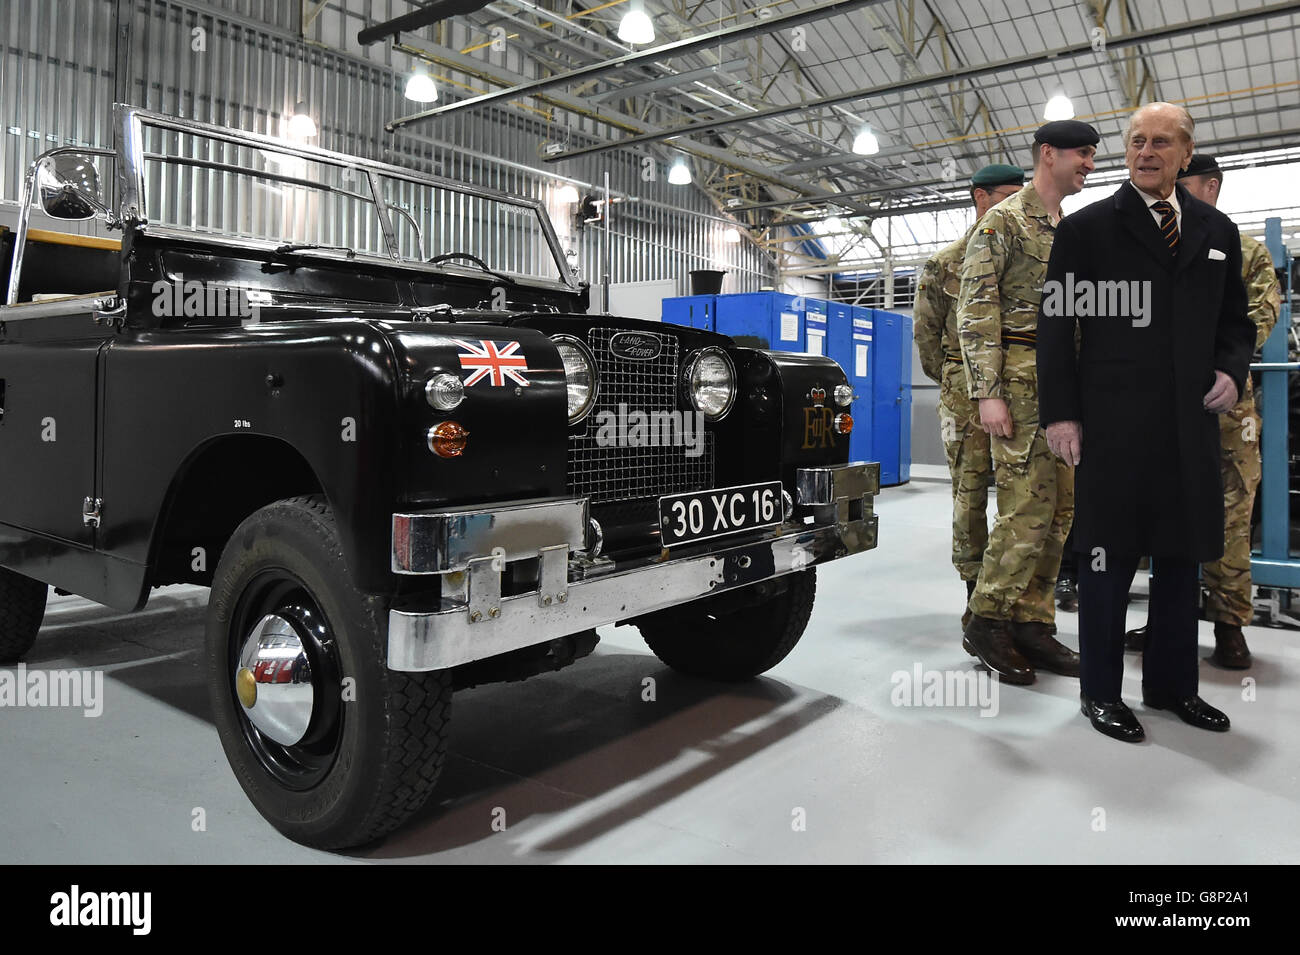 The Duke of Edinburgh, Colonel-in-Chief, Royal Electrical and Mechanical  Engineers (REME), looks at a Black 1960s ceremonial Land Rover Series 2A  Escort Rover formally owned by the Queen Elizabeth The Queen Mother,